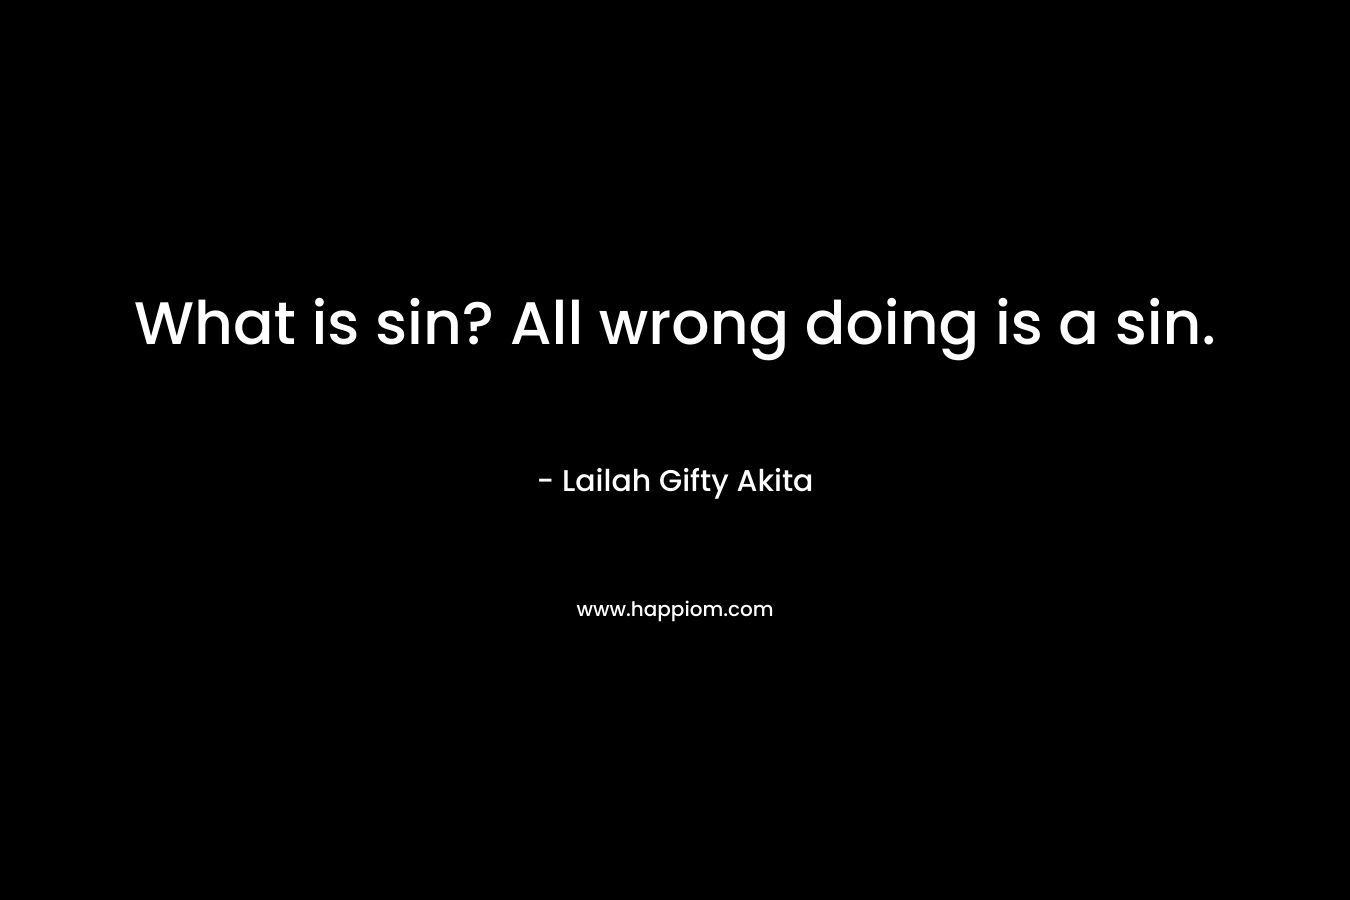 What is sin? All wrong doing is a sin.